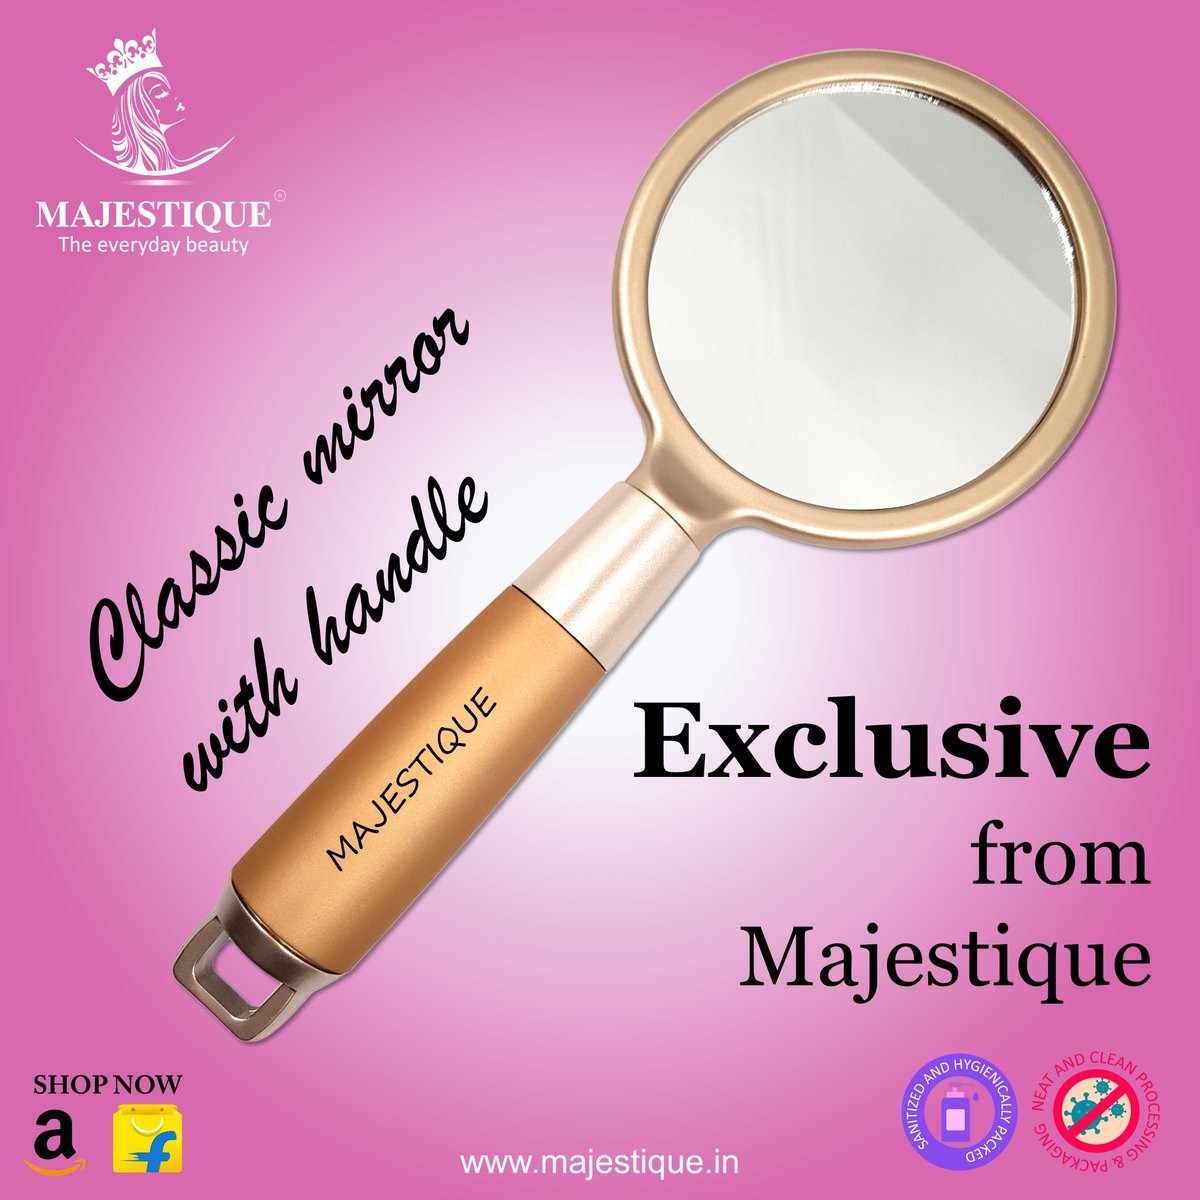 Majestique Golden single-sided glass mirror with a handle. No magnification, no distortion, high-definition float process mirror for a crystal clear image. Ideal for cosmetic use, dental care, etc.

#makeupmirror #makeupmirrors #cosmeticmirror #smallmirror #handlemirror